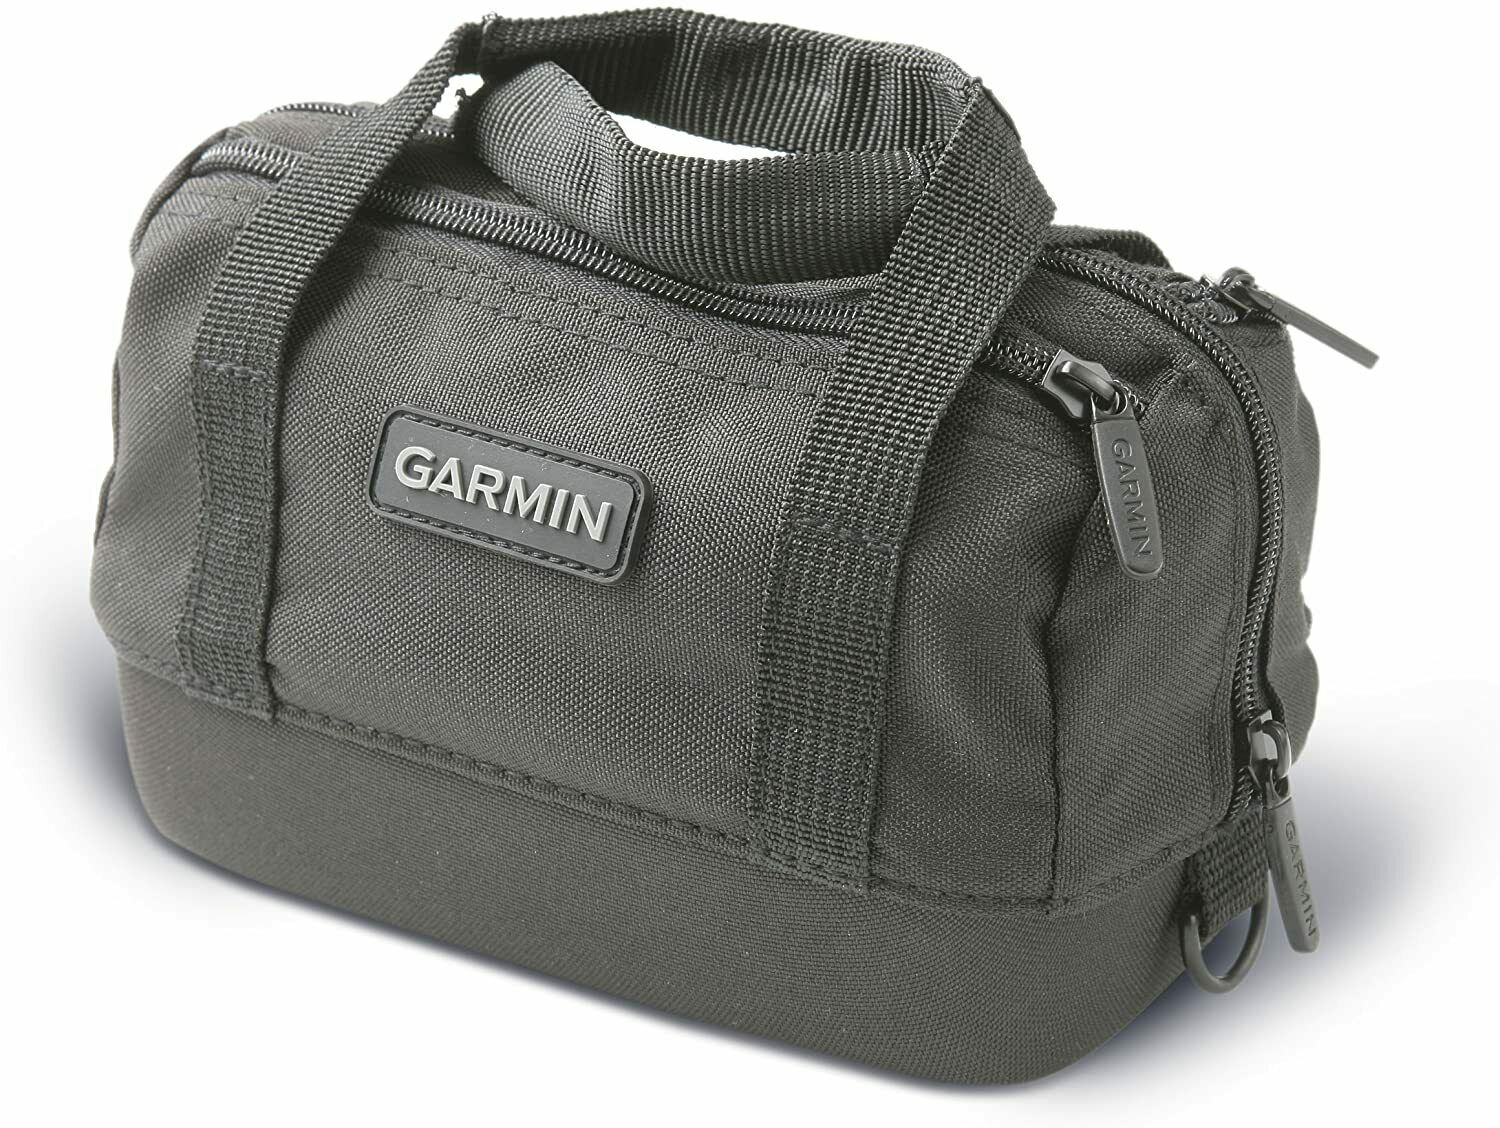 Garmin Carrying Black Bag With Straps And Three Zippers Hard Bottom